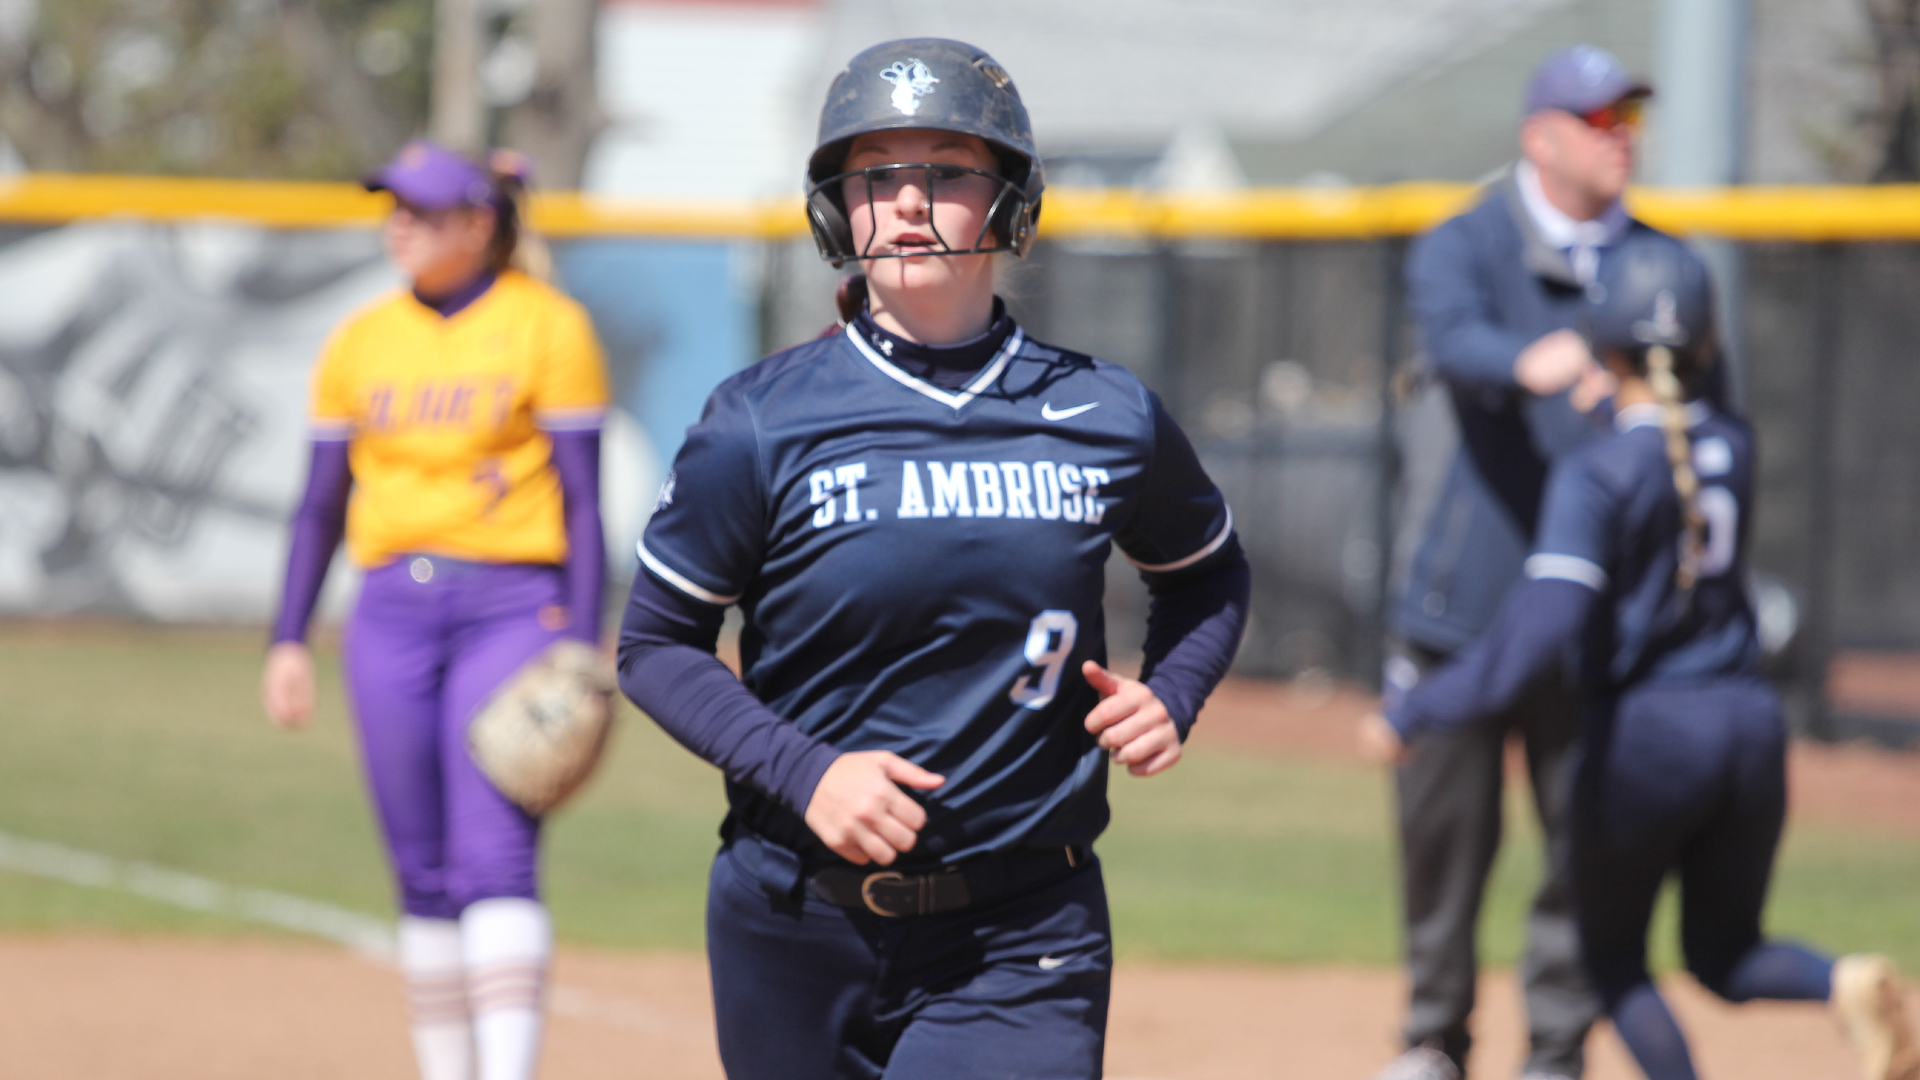 Stenger homers as St. Ambrose earns split with Trinity Christian